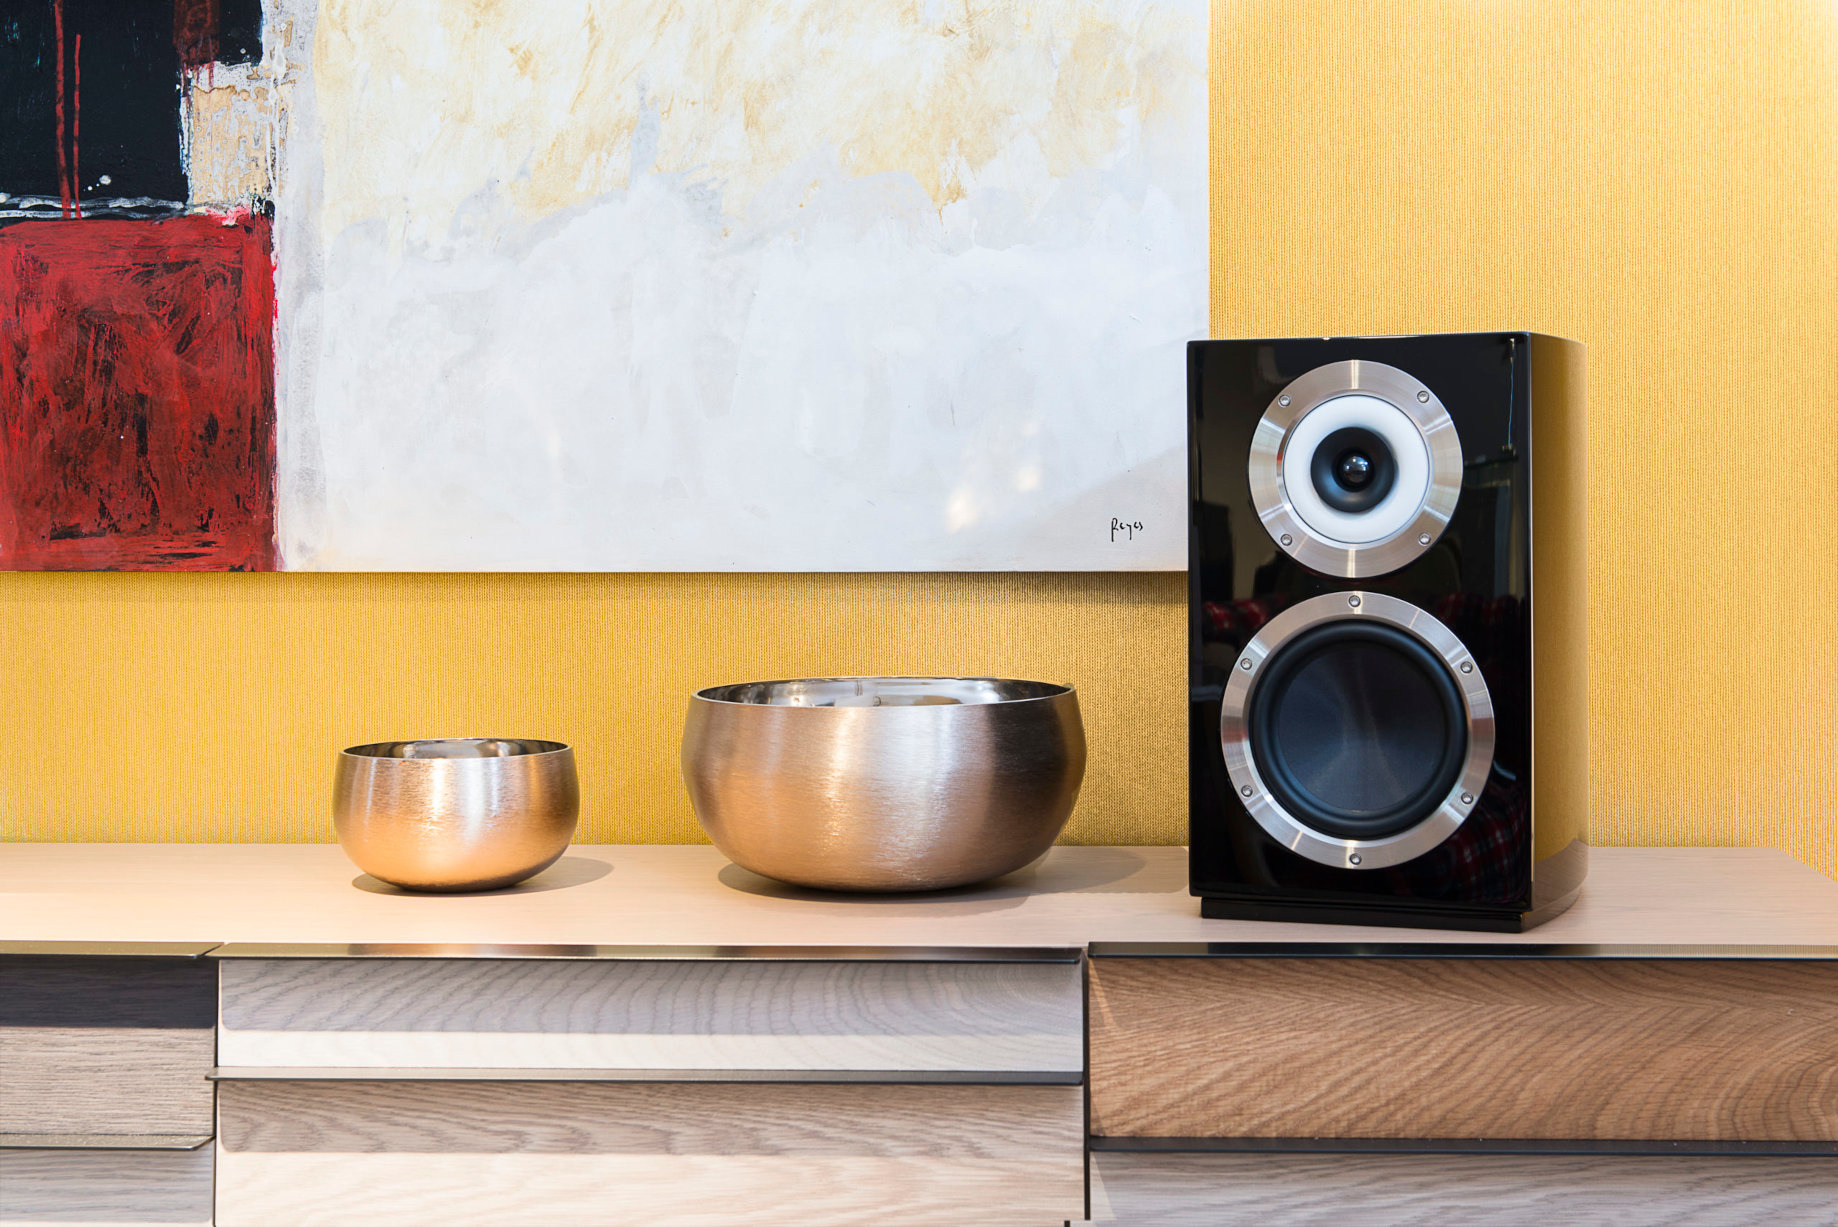 Murano - An exceptional compact bookshelf speaker from Cabasse